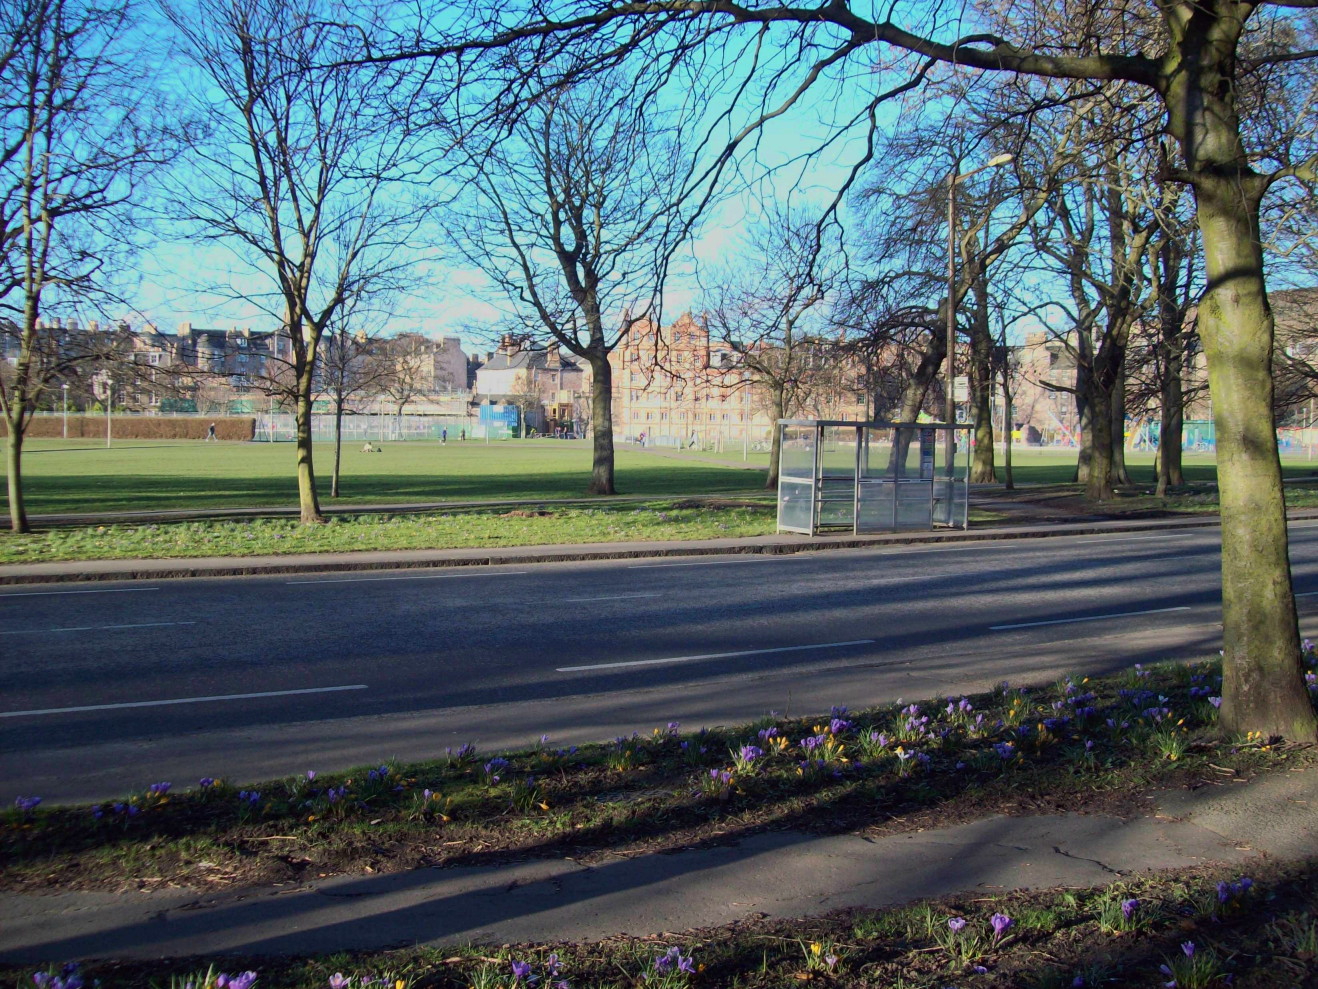 view across a path edged with crocuses and then a tarmacced road, through bare trees and then across an open green space towards high buildings in the distance